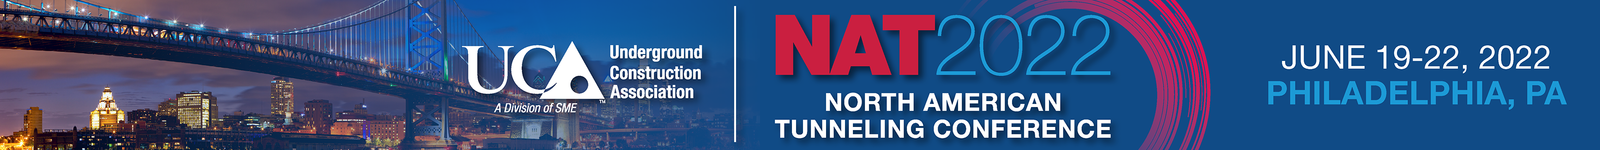 2022 North American Tunneling Conference (NAT) logo